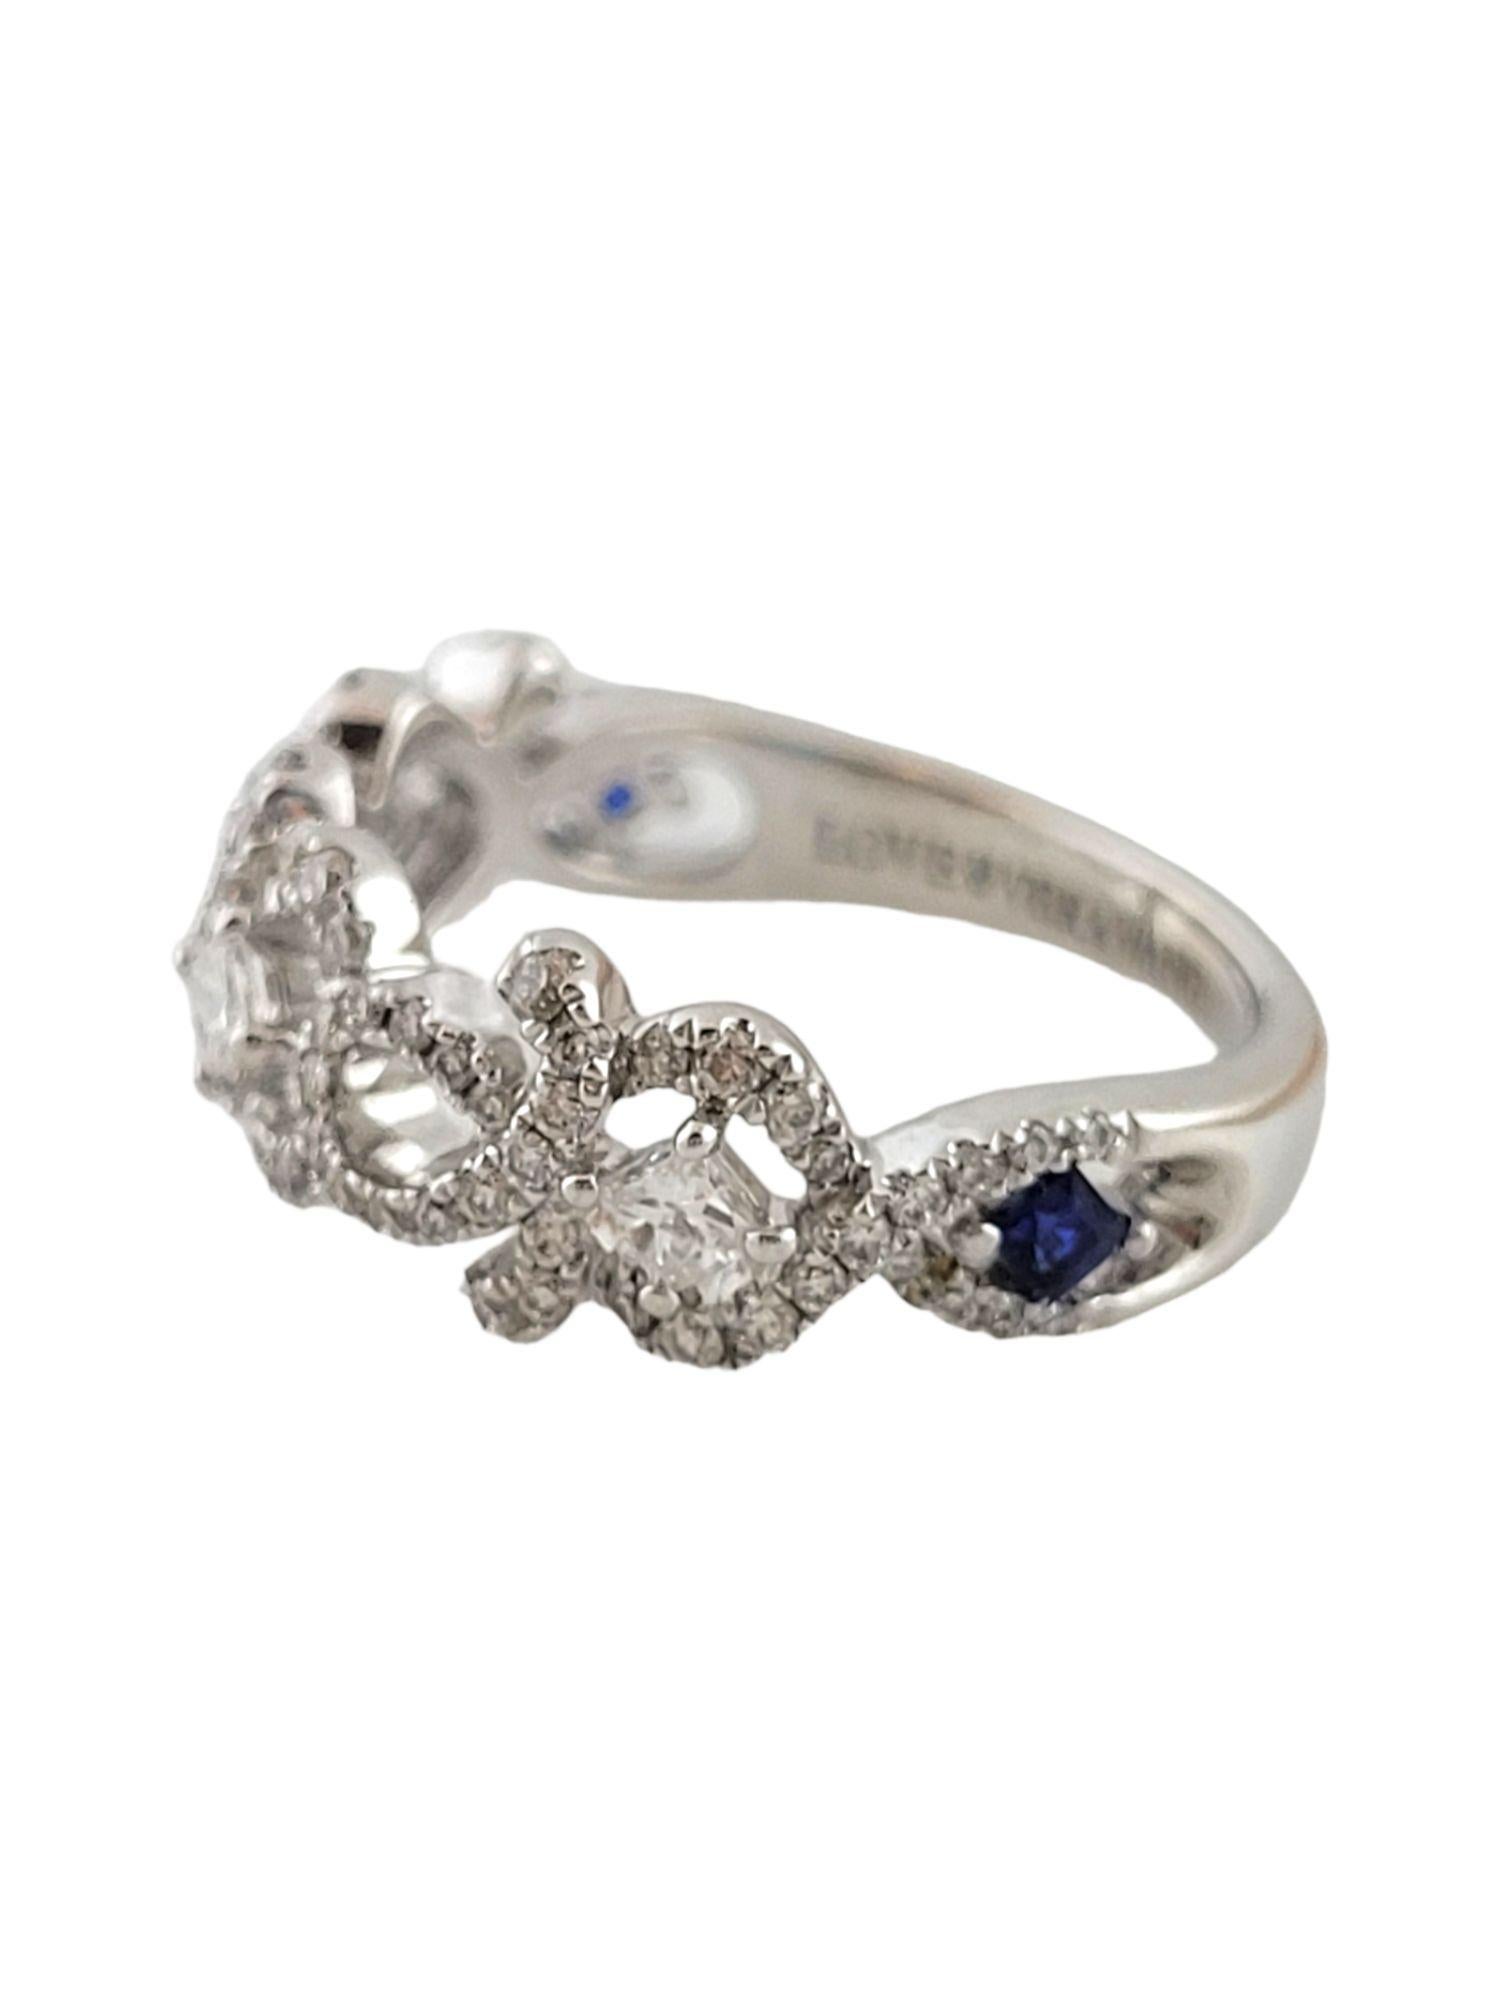 This gorgeous 14K white gold ring has 79 round cut diamonds decorated around 3 princess cut diamonds and 2 square cut sapphires for a beautiful look!

82 diamonds total

2 blue sapphires total

Approximate total diamond weight: .54 cttw

Diamond